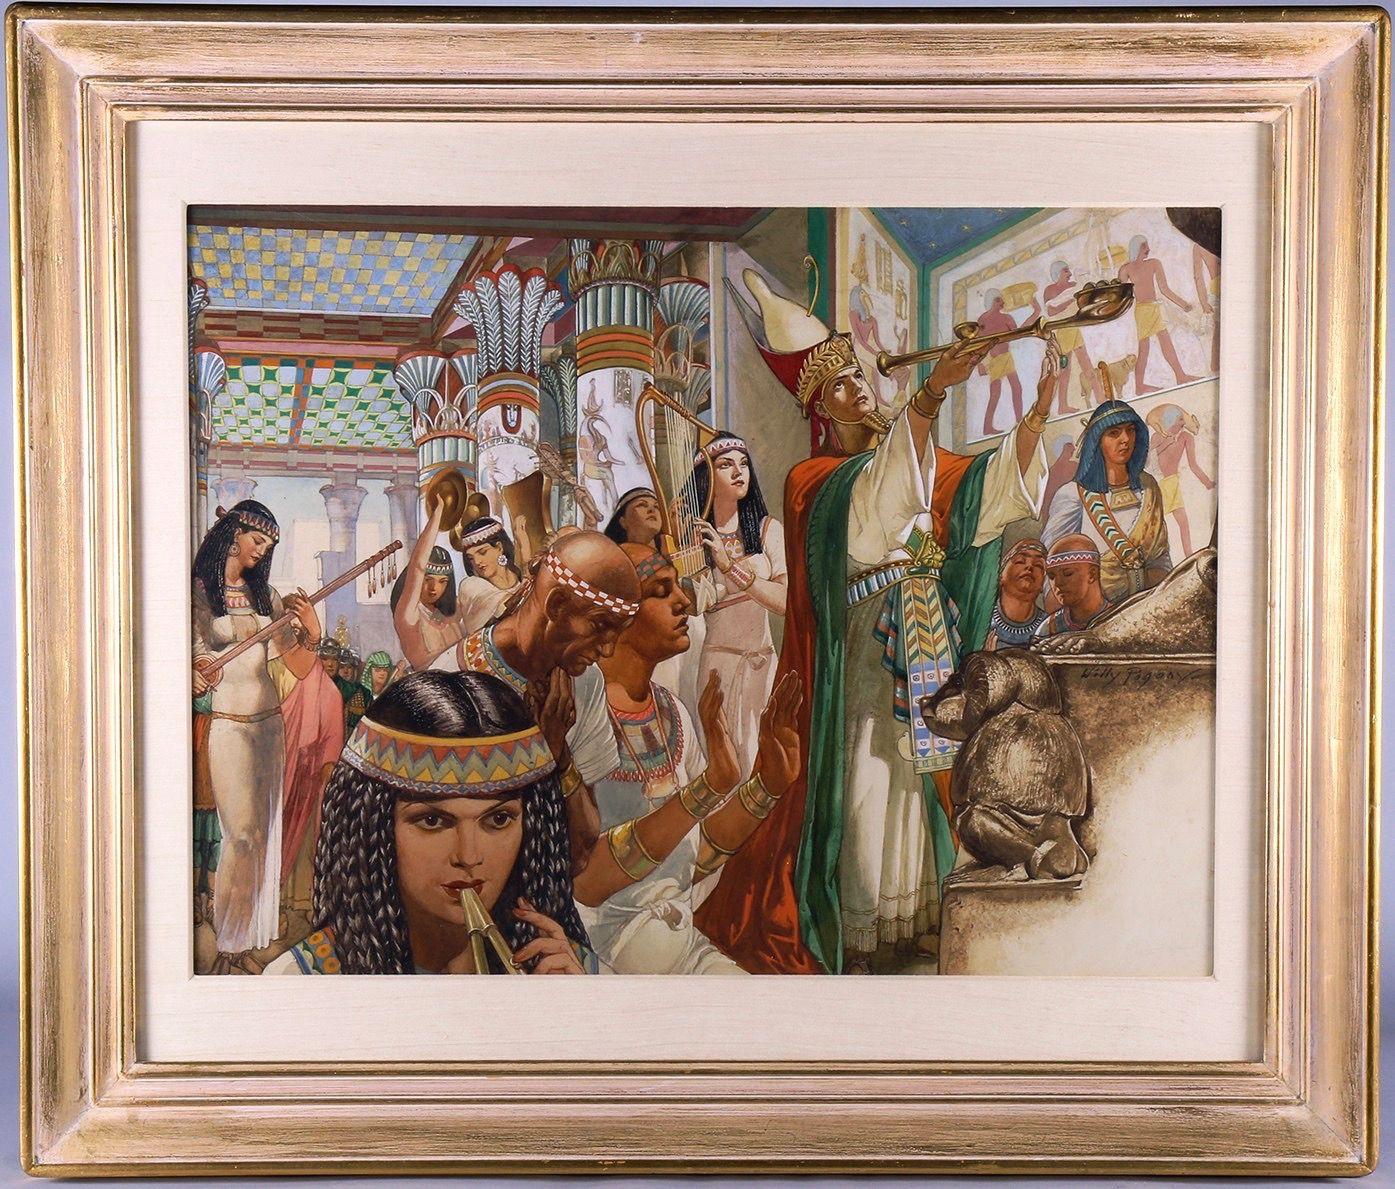 Nero's Temple On The Nile - Art by Willy Pogany